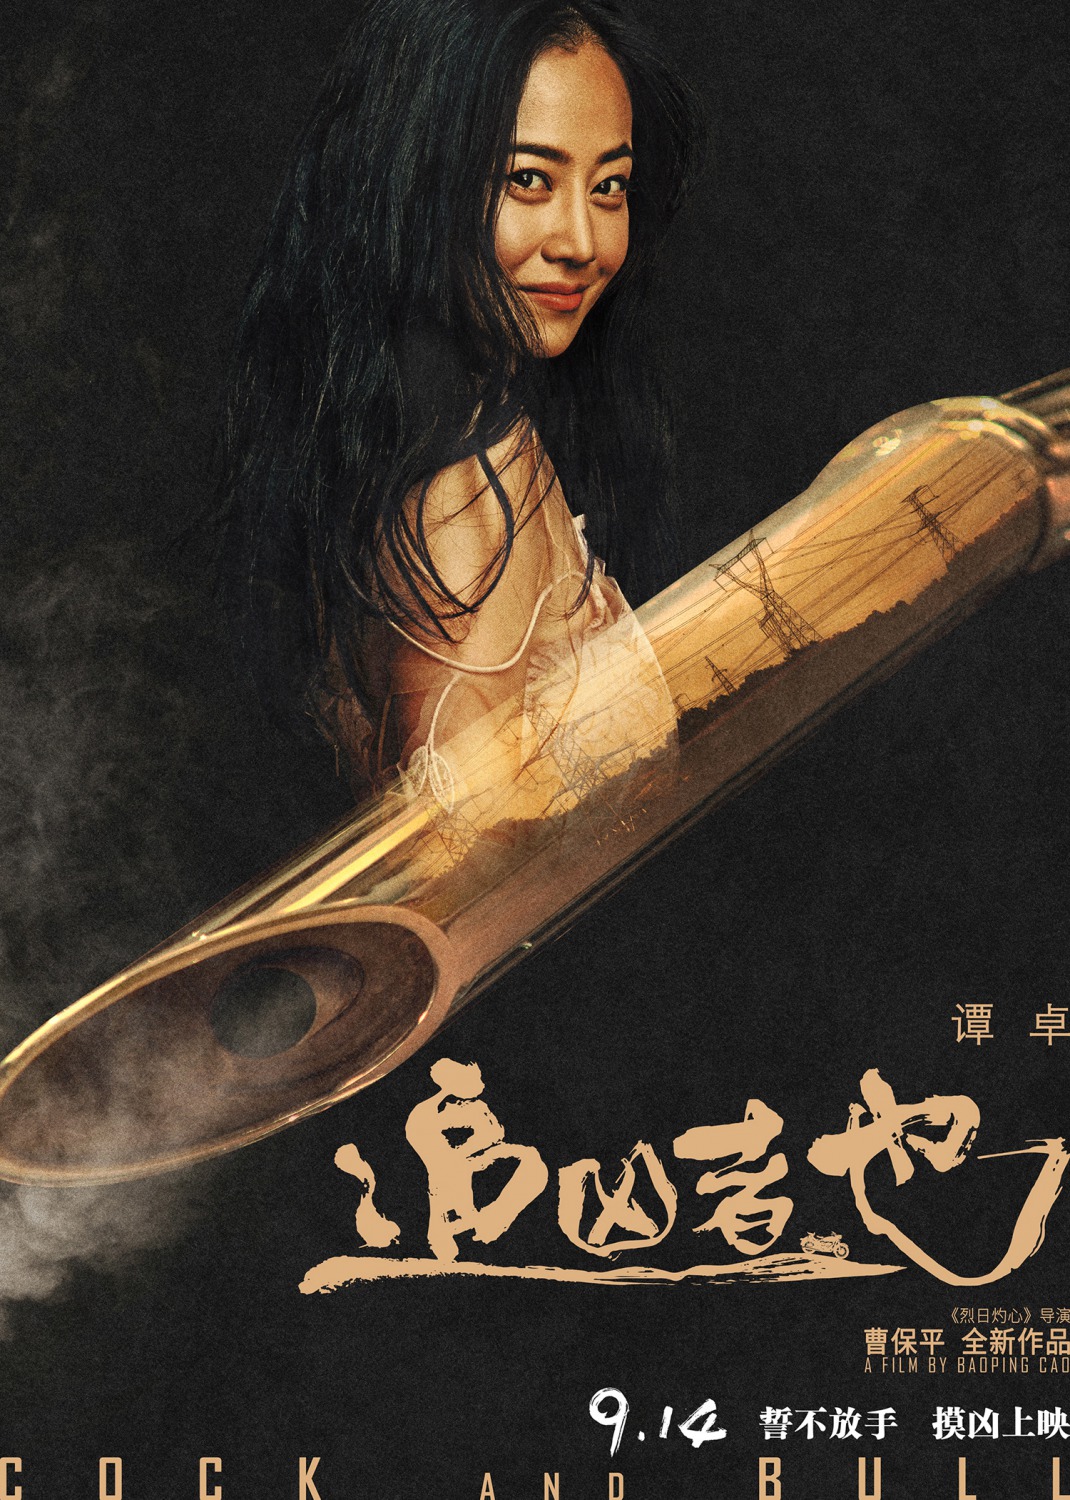 Extra Large Movie Poster Image for Zhui xiong zhe ye (#13 of 16)